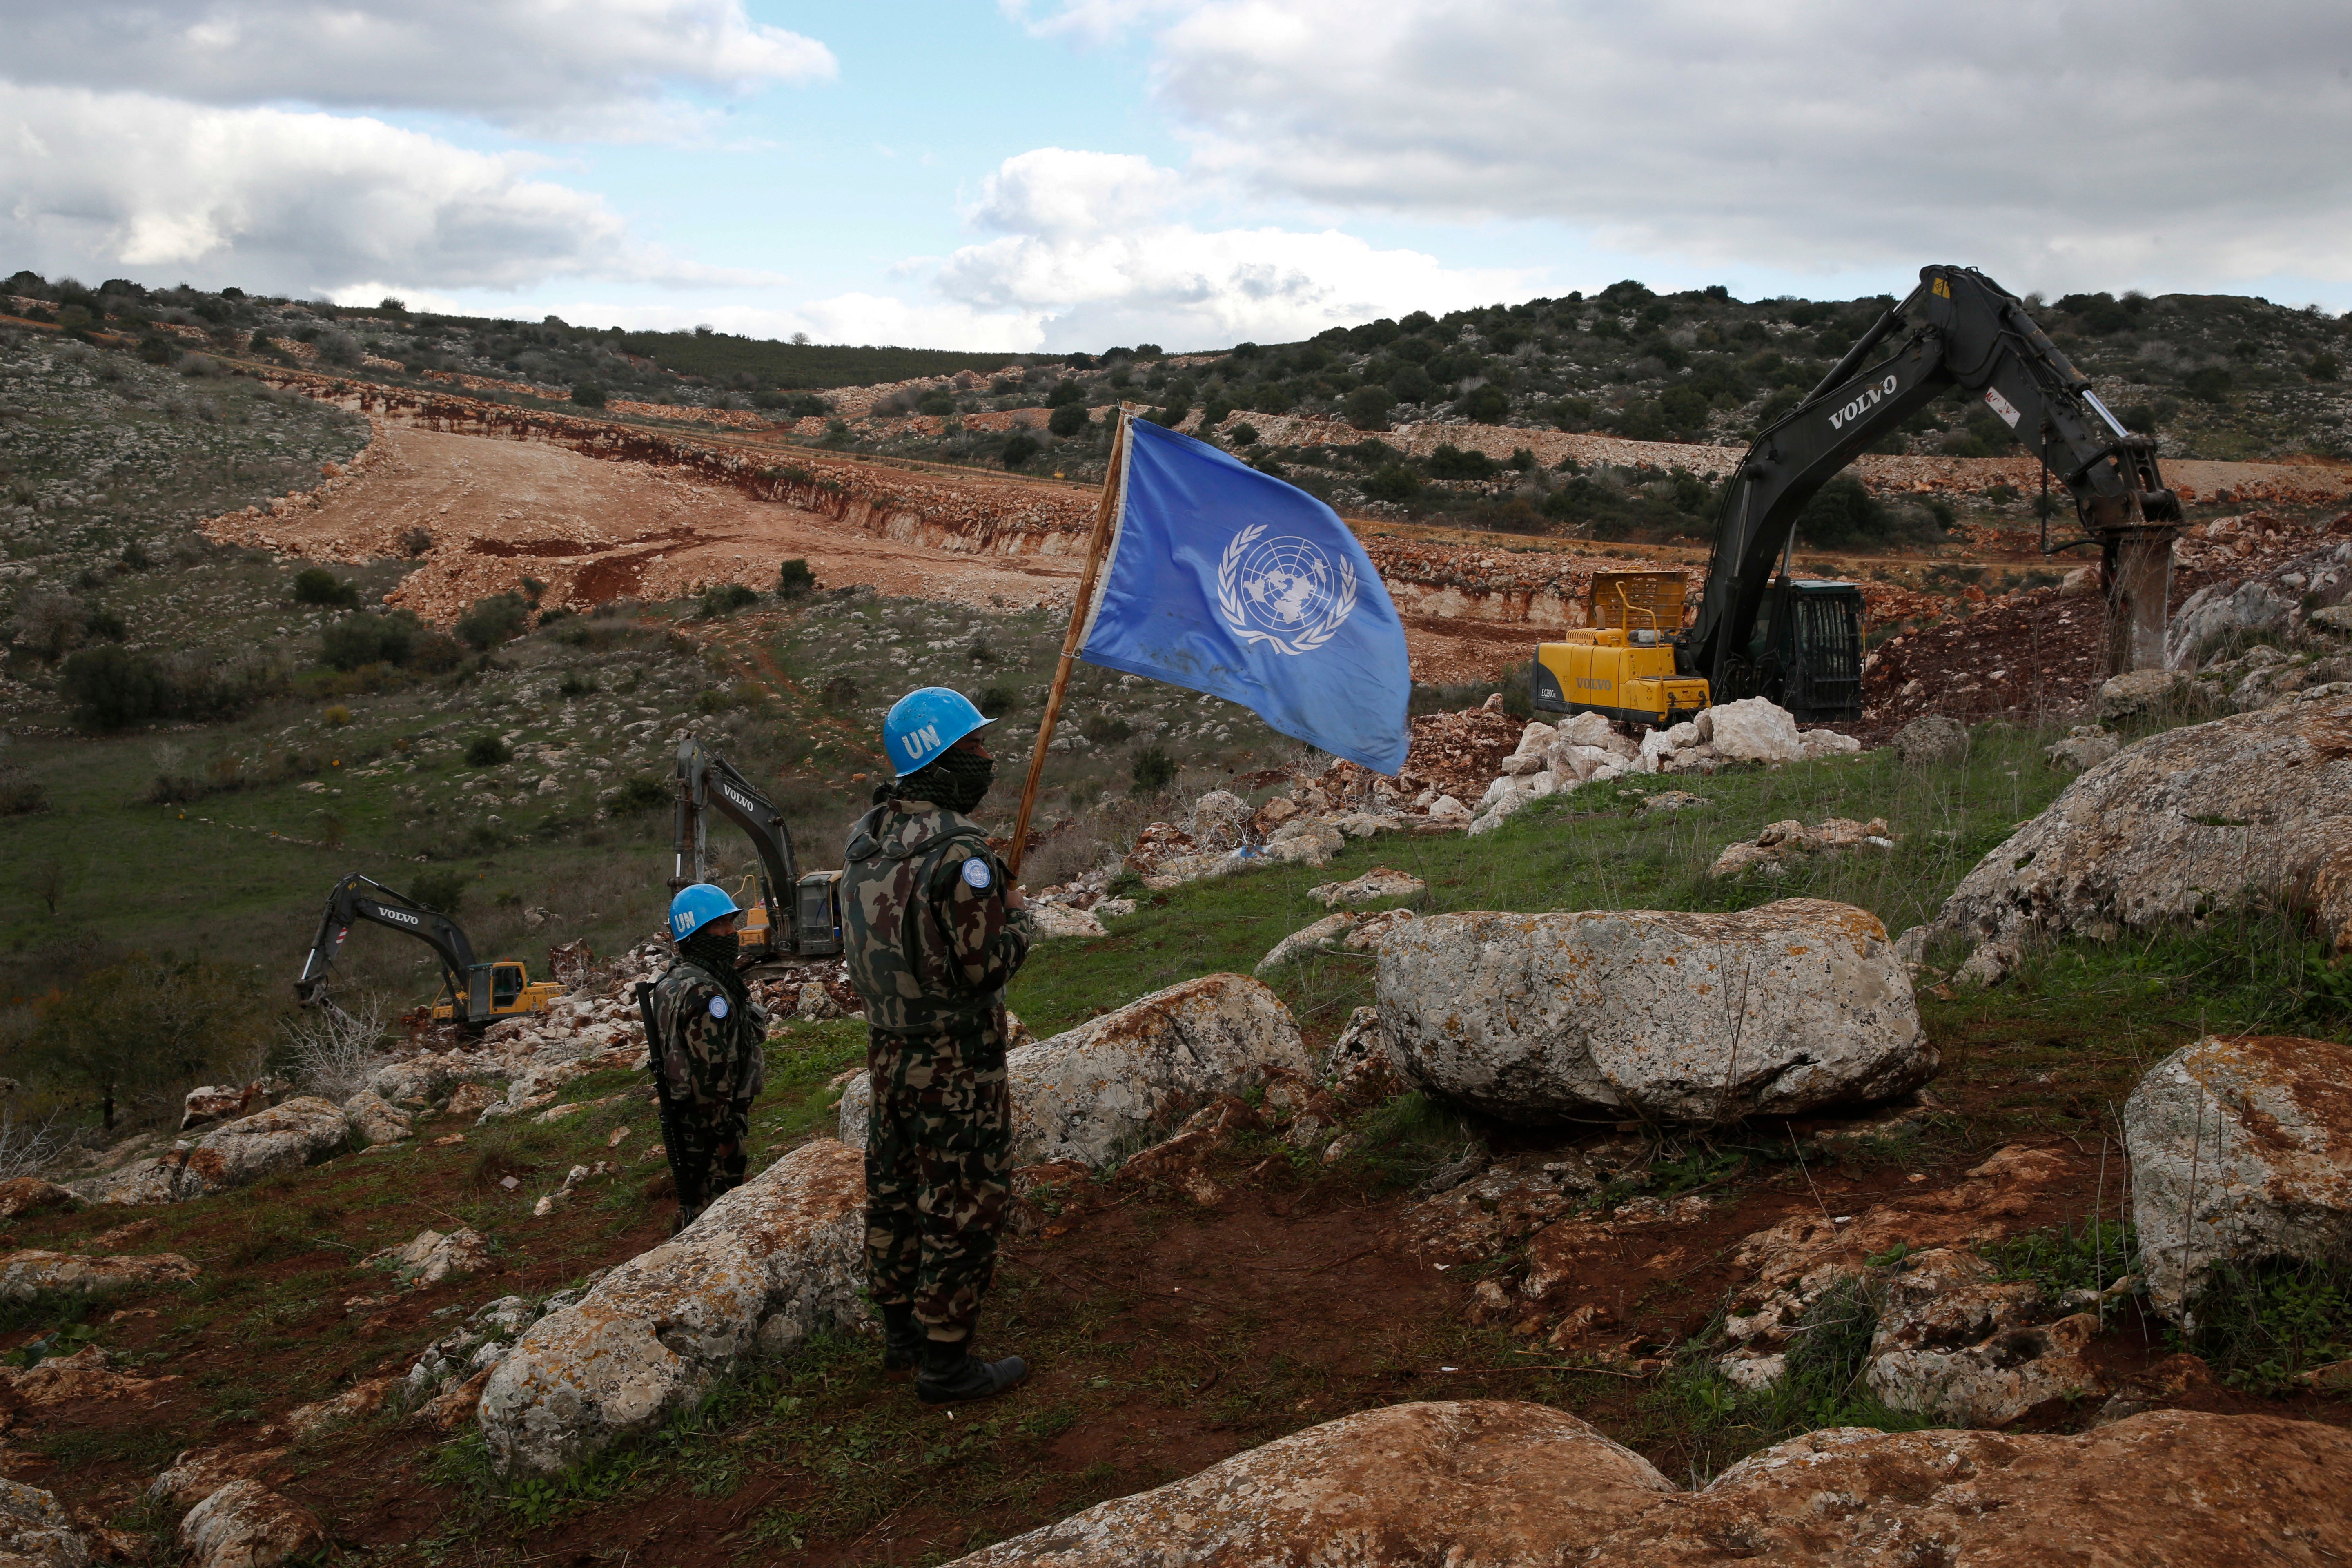 UN peacekeepers hold their flag as they observe Israeli excavators attempting to destroy tunnels built by Hezbollah near the border in 2019